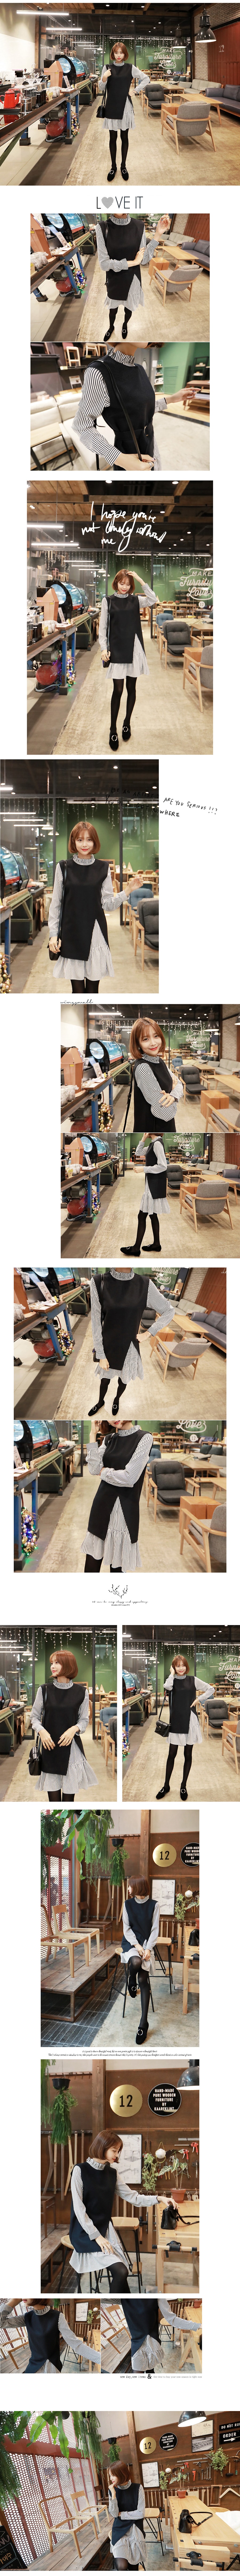 [Autumn New] Wool Blend Vest and Striped frill dress 2 Pieces Set Black&Navy One Size(S-M)